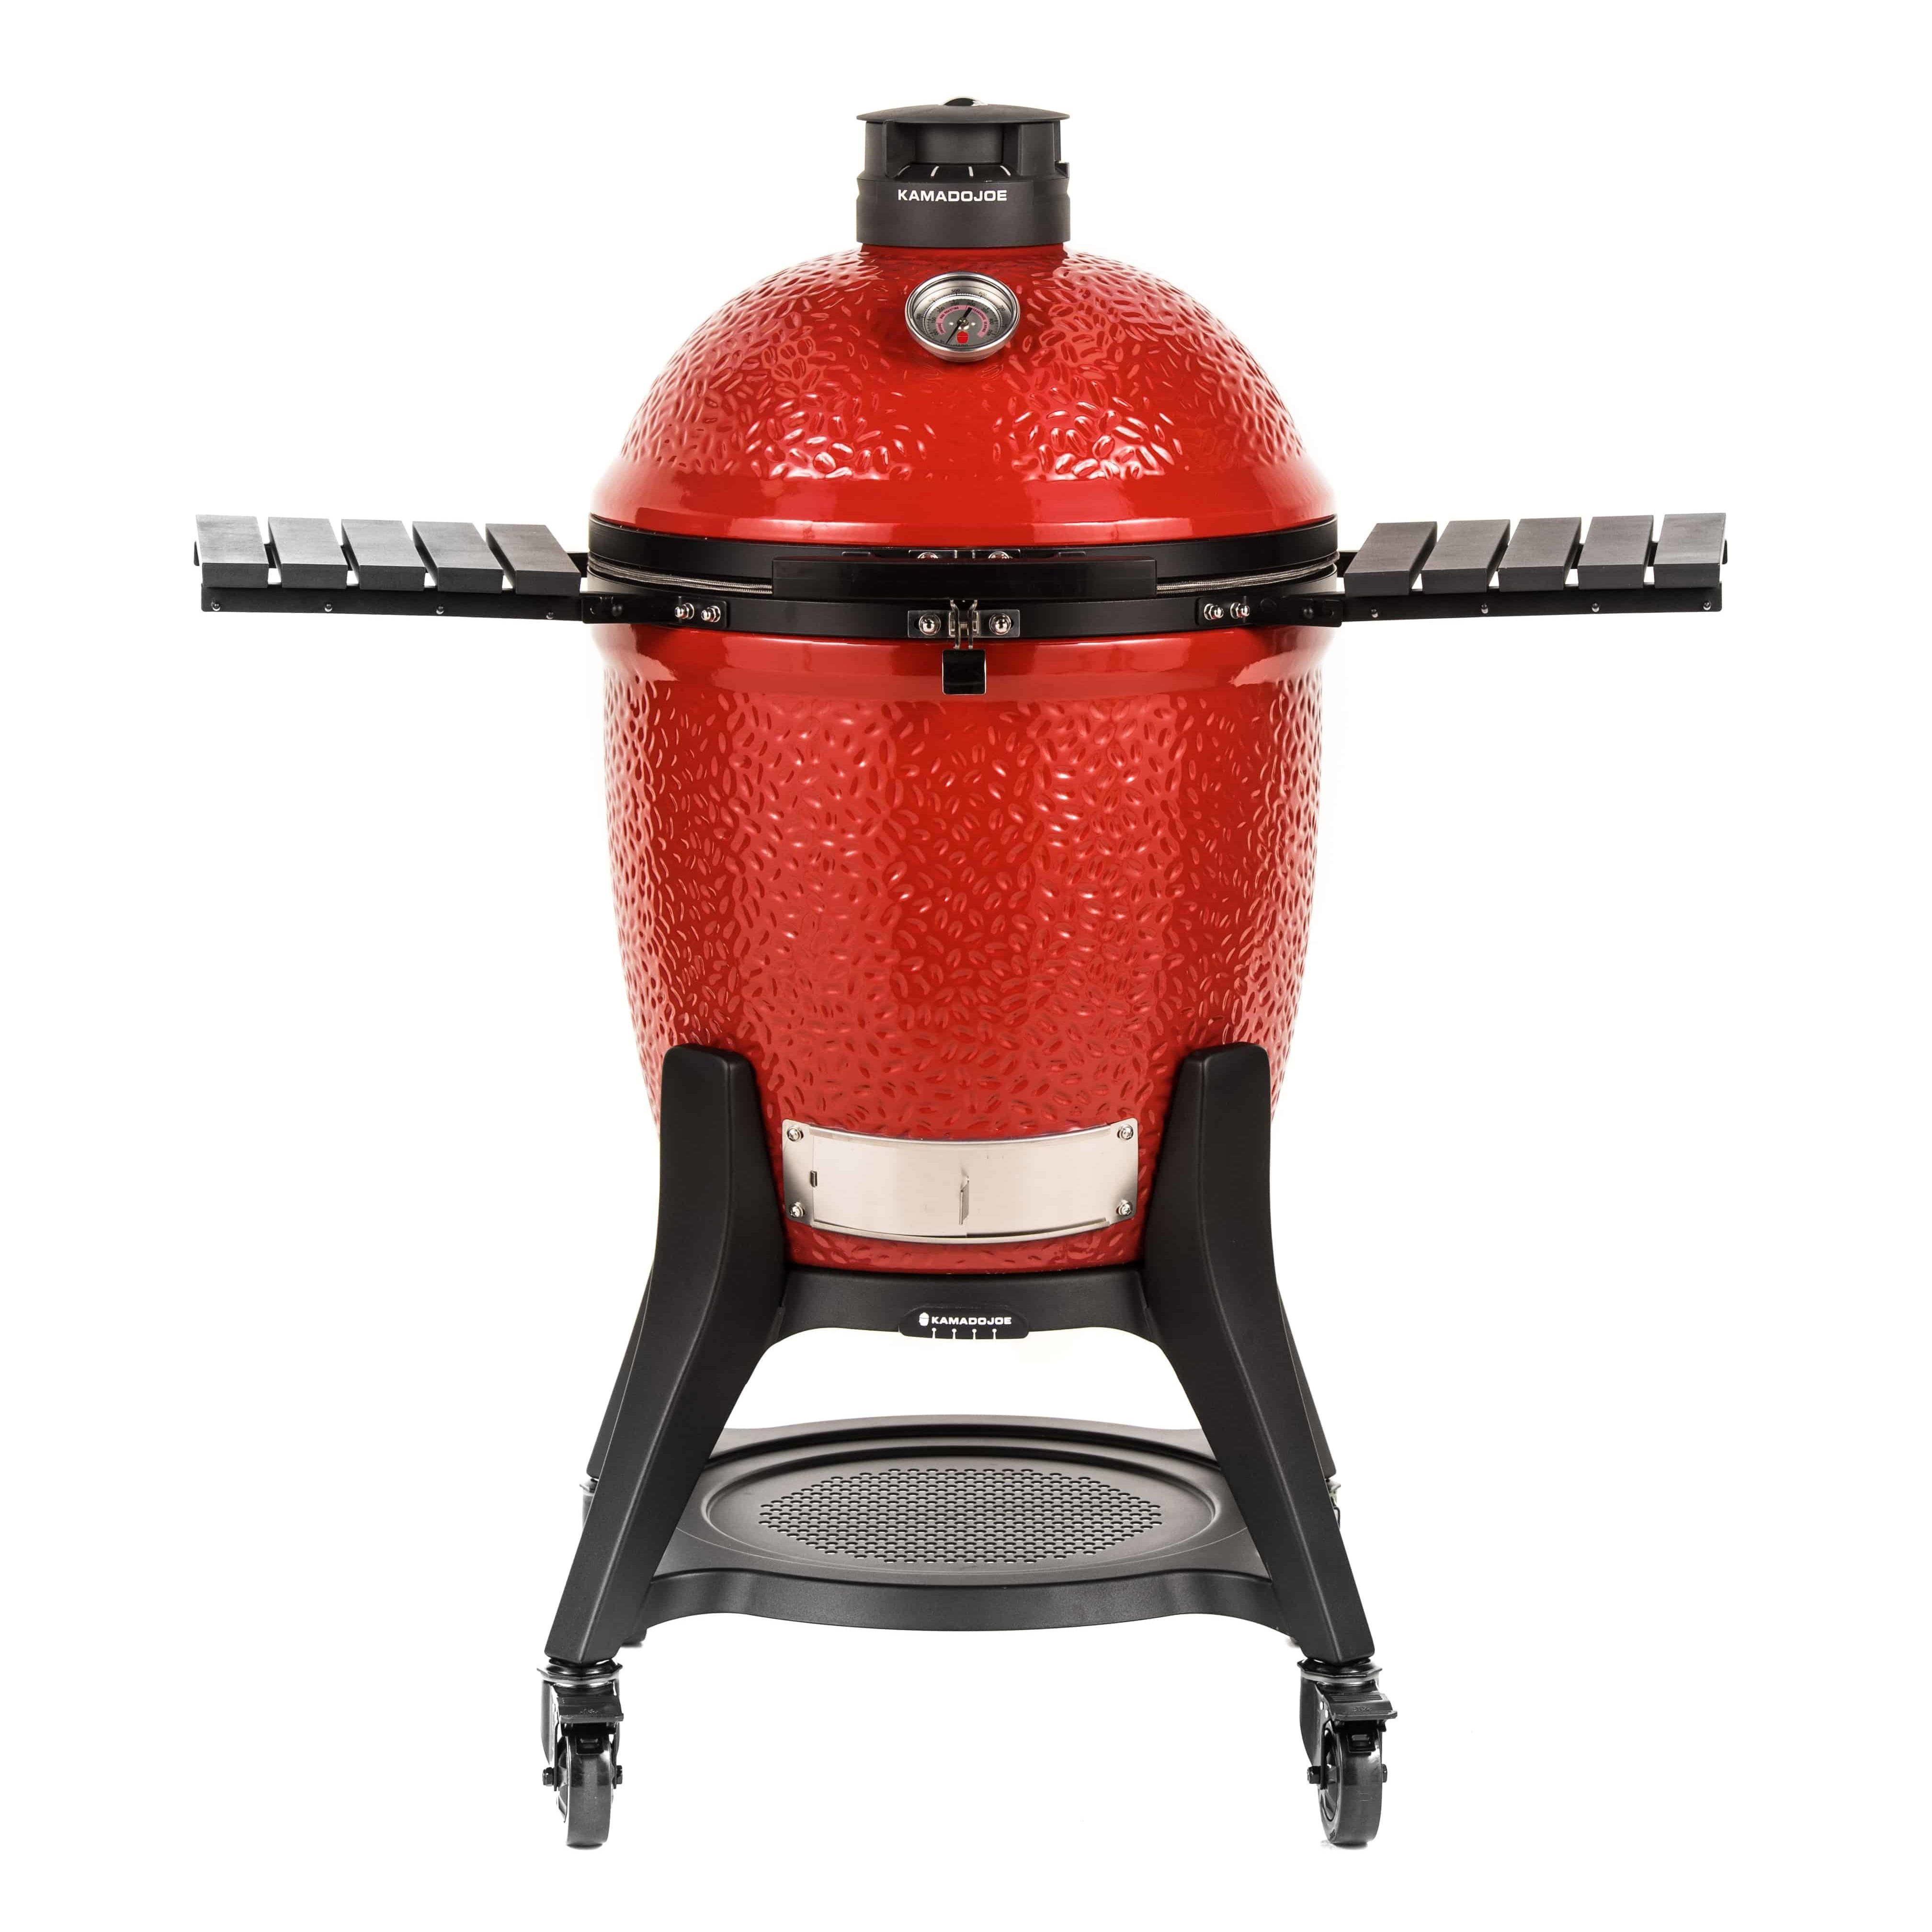 Classic III KJ15040921 Charcoal Grill, Red, Side Shelf Included: Yes, Ceramic Body